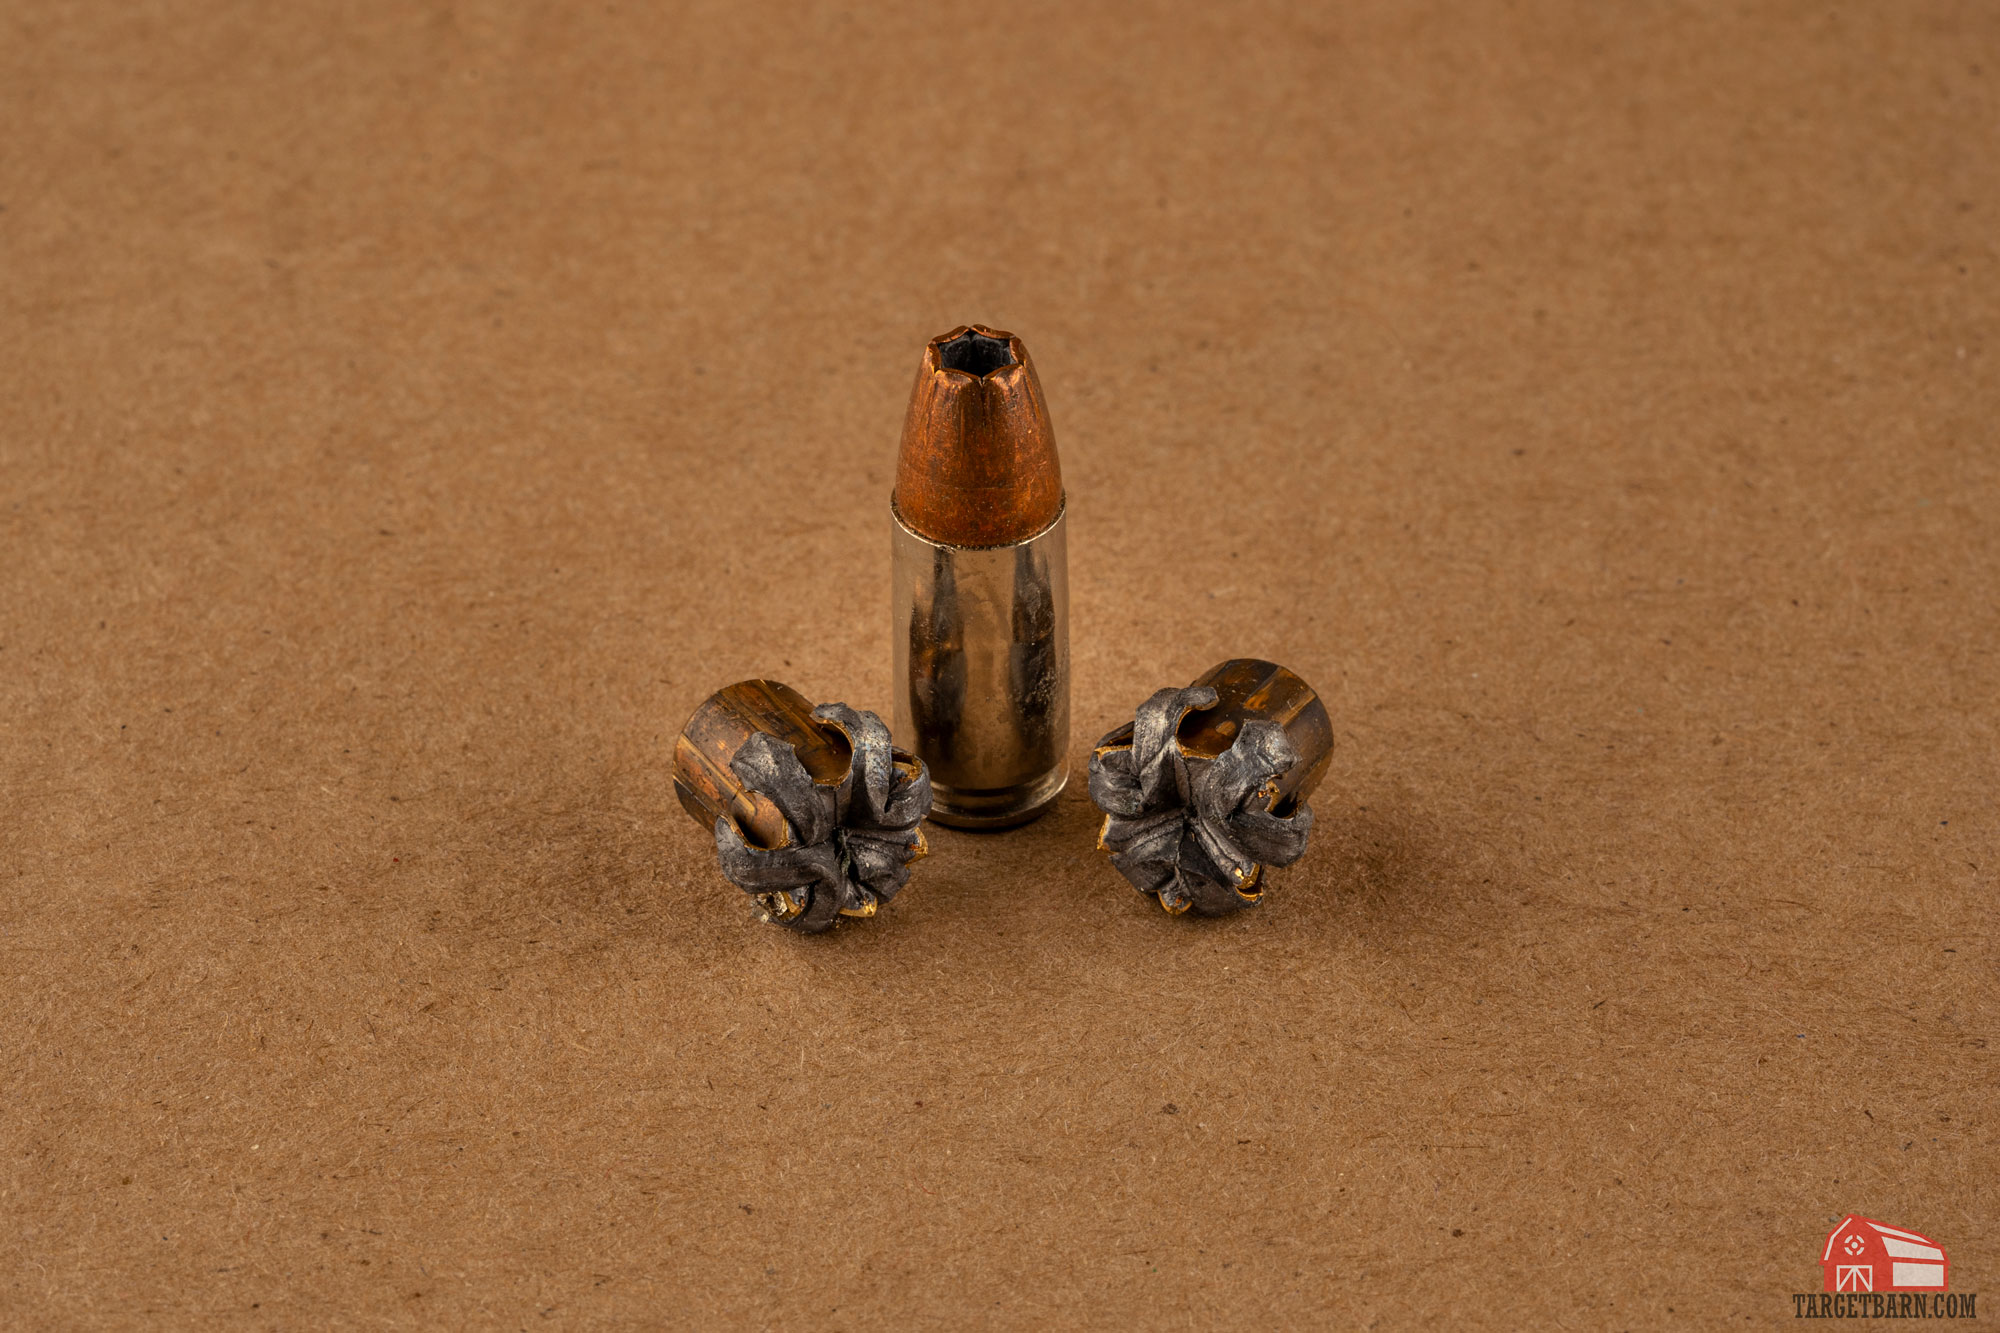 expanded 9mm hollow point bullets